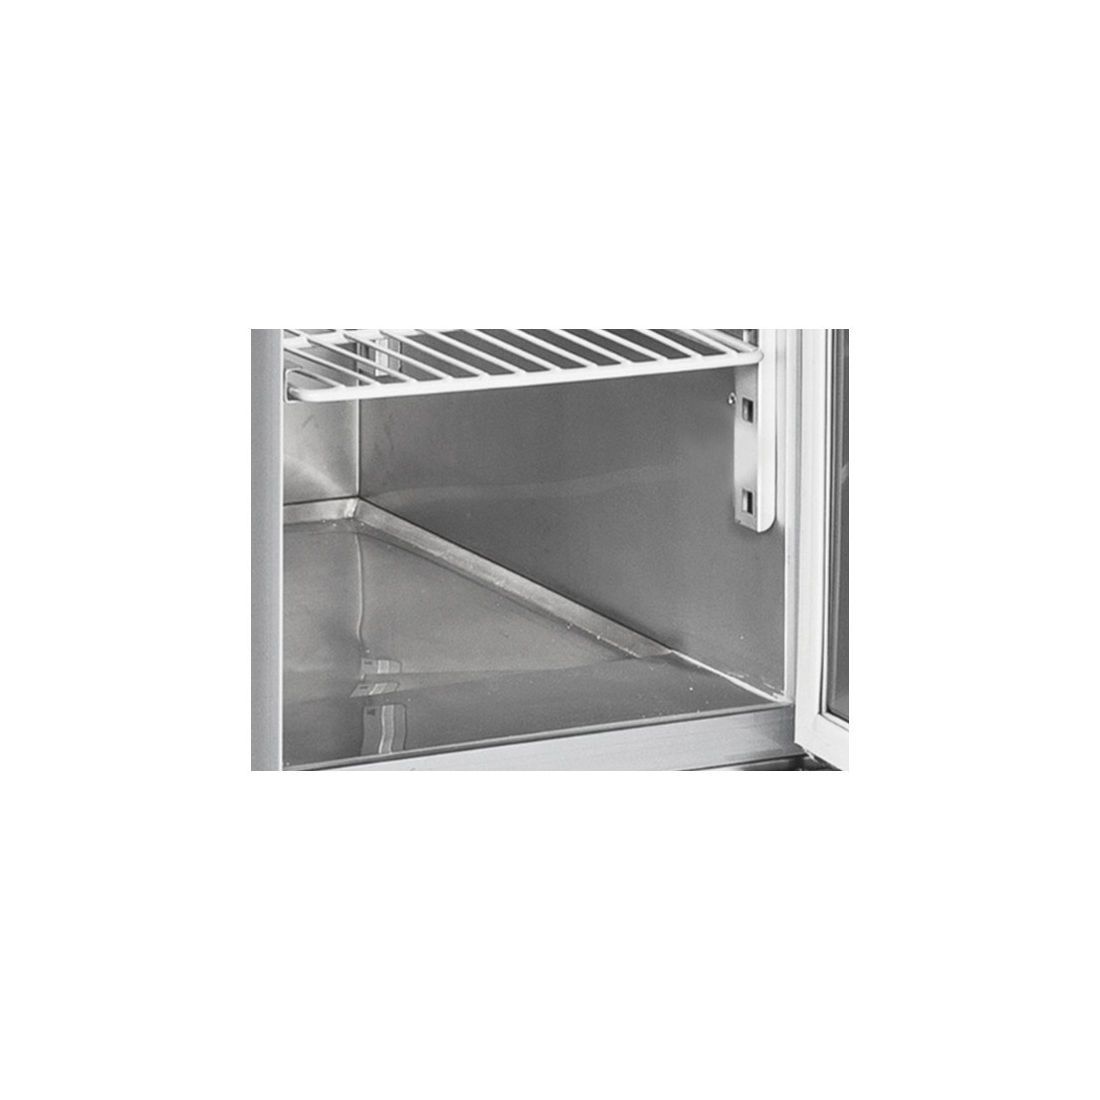 COOL HEAD ,CRD45, Two Drawers Undercounter Refrigerator|mkayn|مكاين